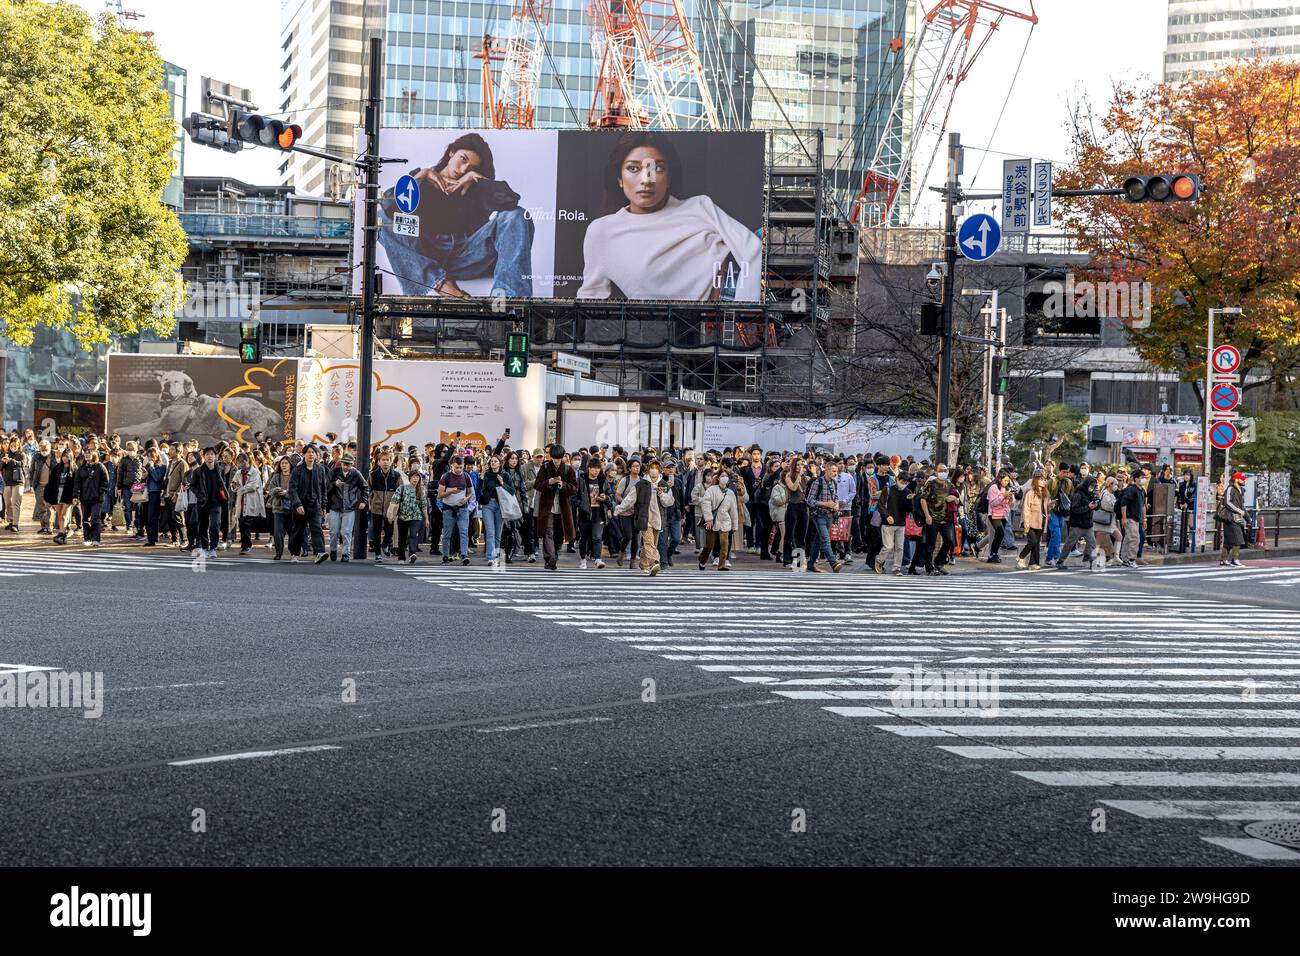 TOKYO/JAPAN - November 22, crowds of people prepare to cross the famous Shibuya Crossing Stock Photo